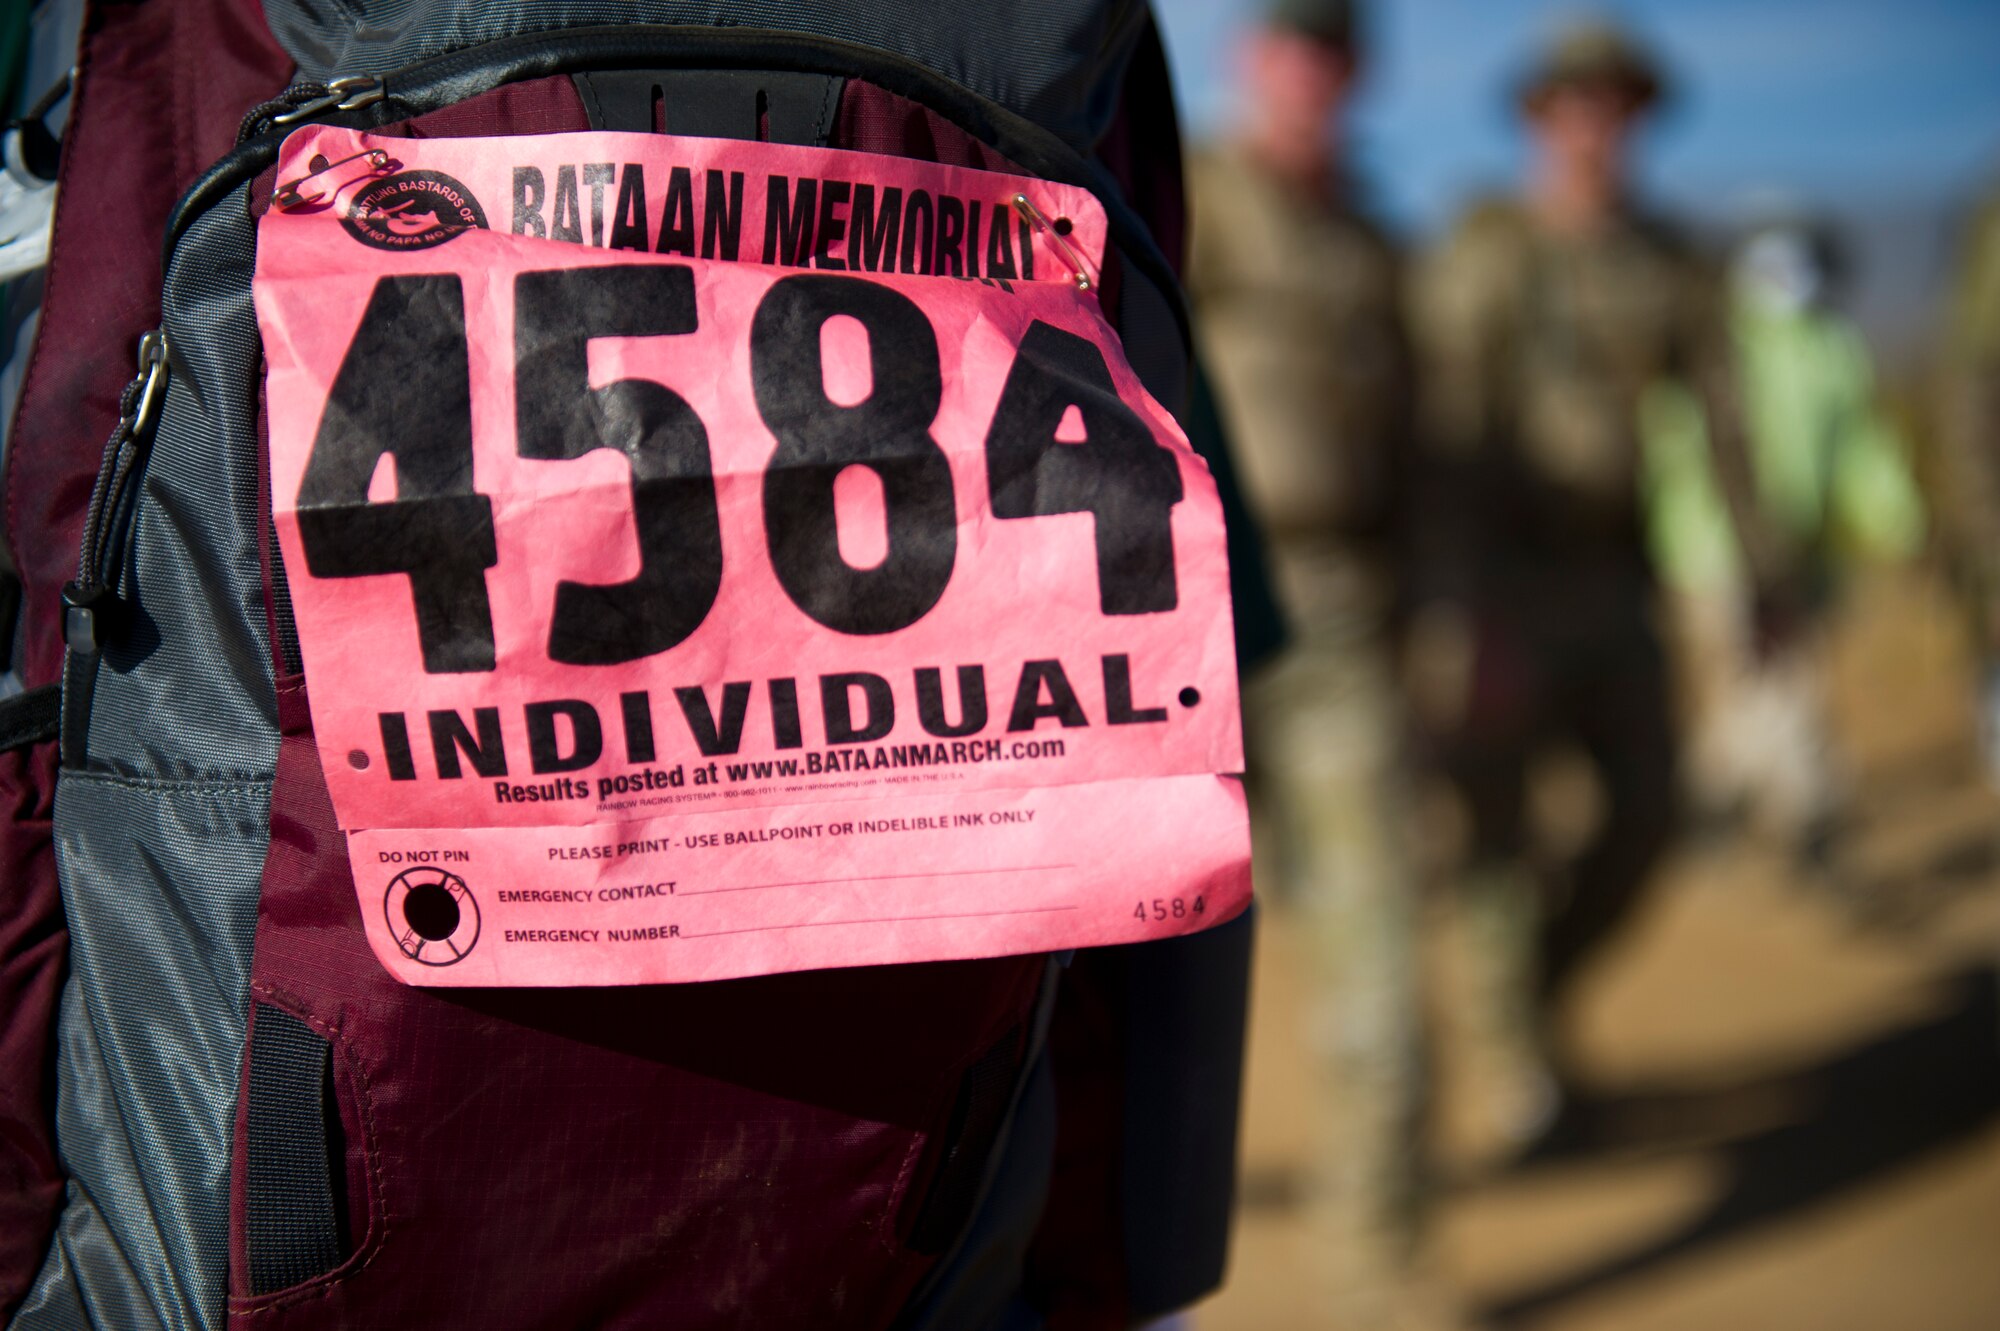 WHITE SANDS MISSILE RANGE, N.M. – A participant displays an individual race number on her backpack during the Bataan Memorial Death March here March 25. The march began around 7 a.m., and the course stayed open until 8 p.m., when darkness fell and it was no longer safe for participants to continue.  (U.S. Air Force photo by Airman 1st Class Daniel E. Liddicoet/Released)